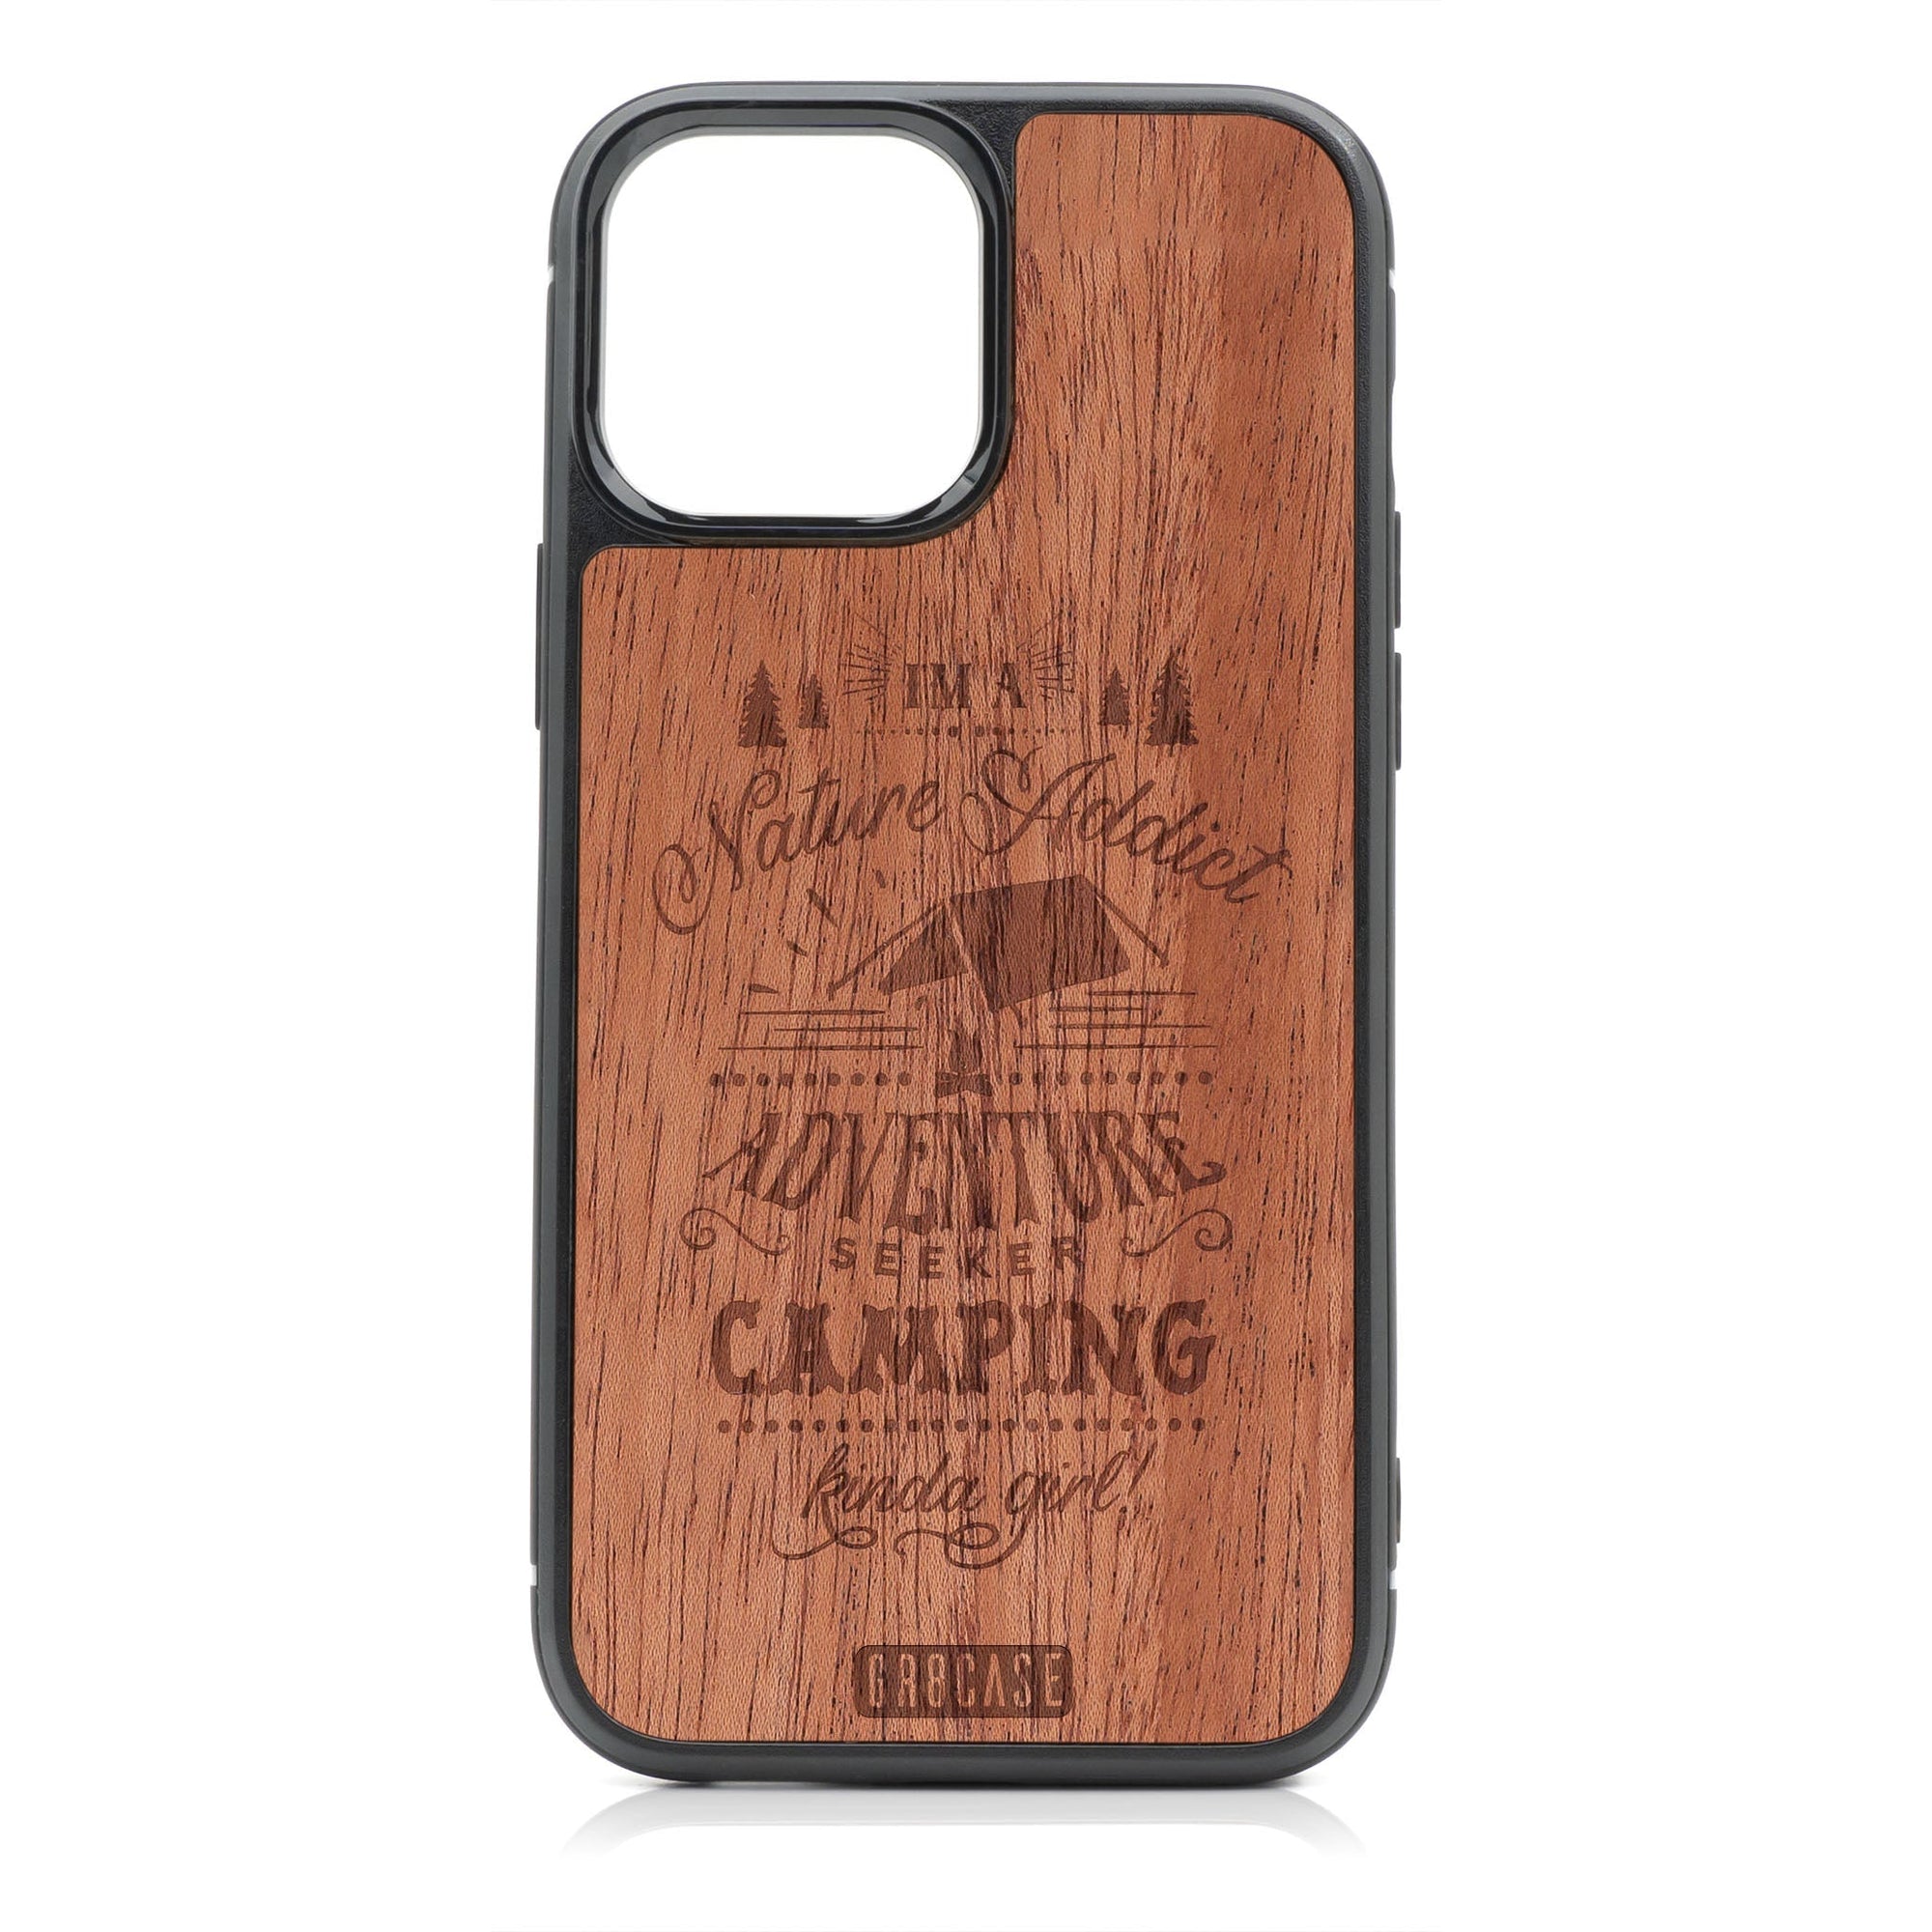 I'm A Nature Addict Adventure Seeker Camping Kinda Girl Design Wood Case For iPhone 15 Pro Max